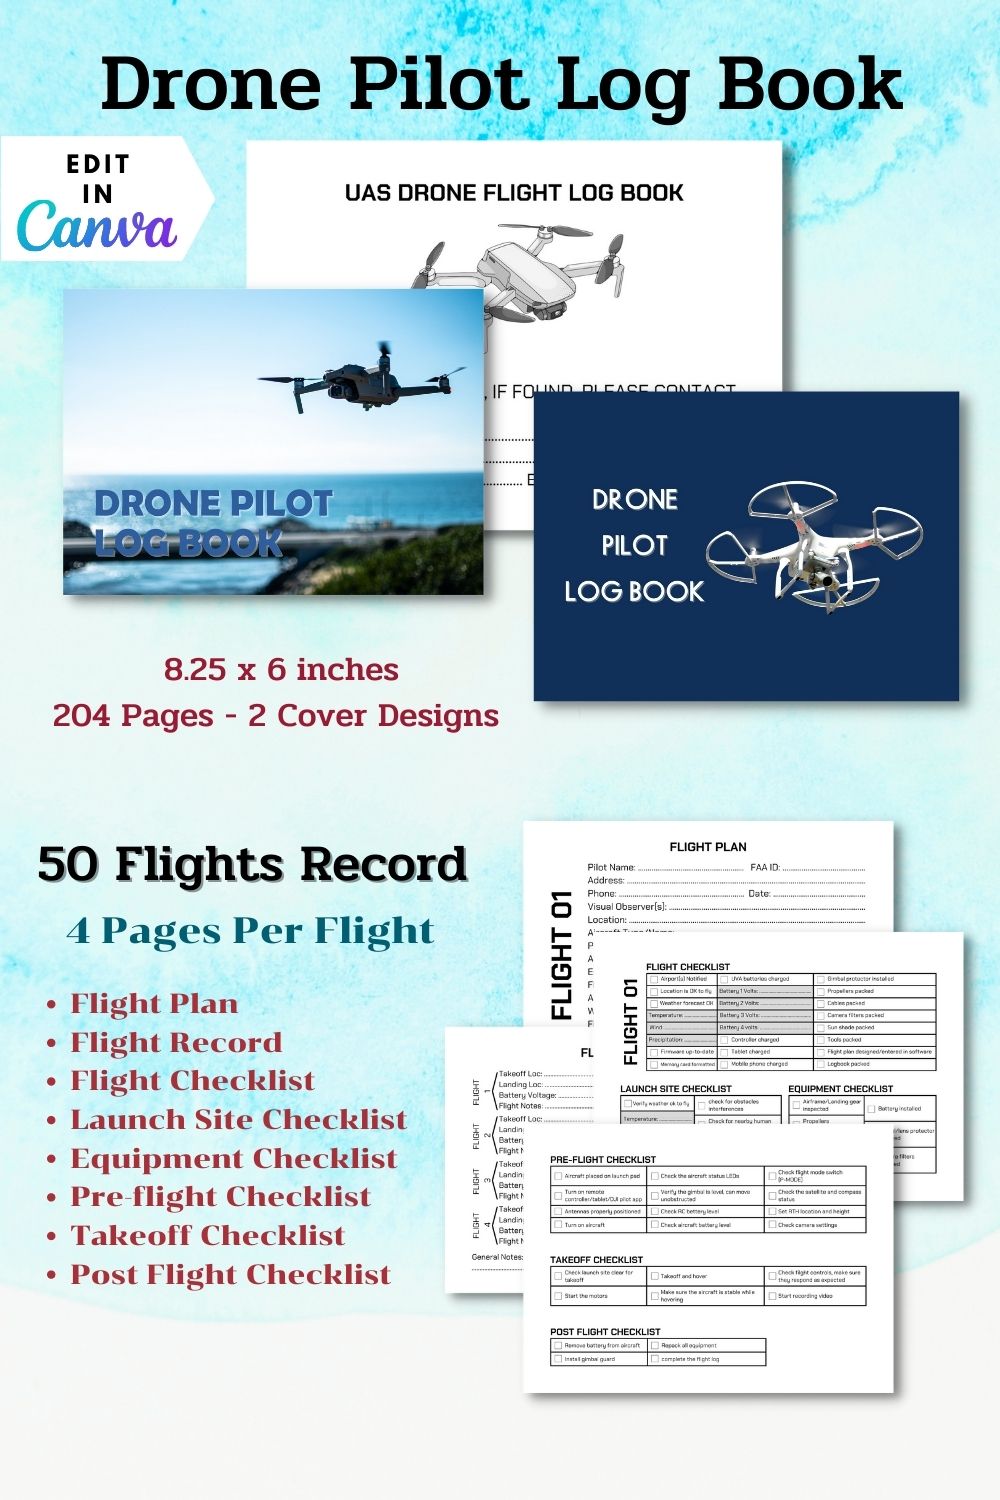 Drone Pilot Logbook - Canva template pinterest preview image.